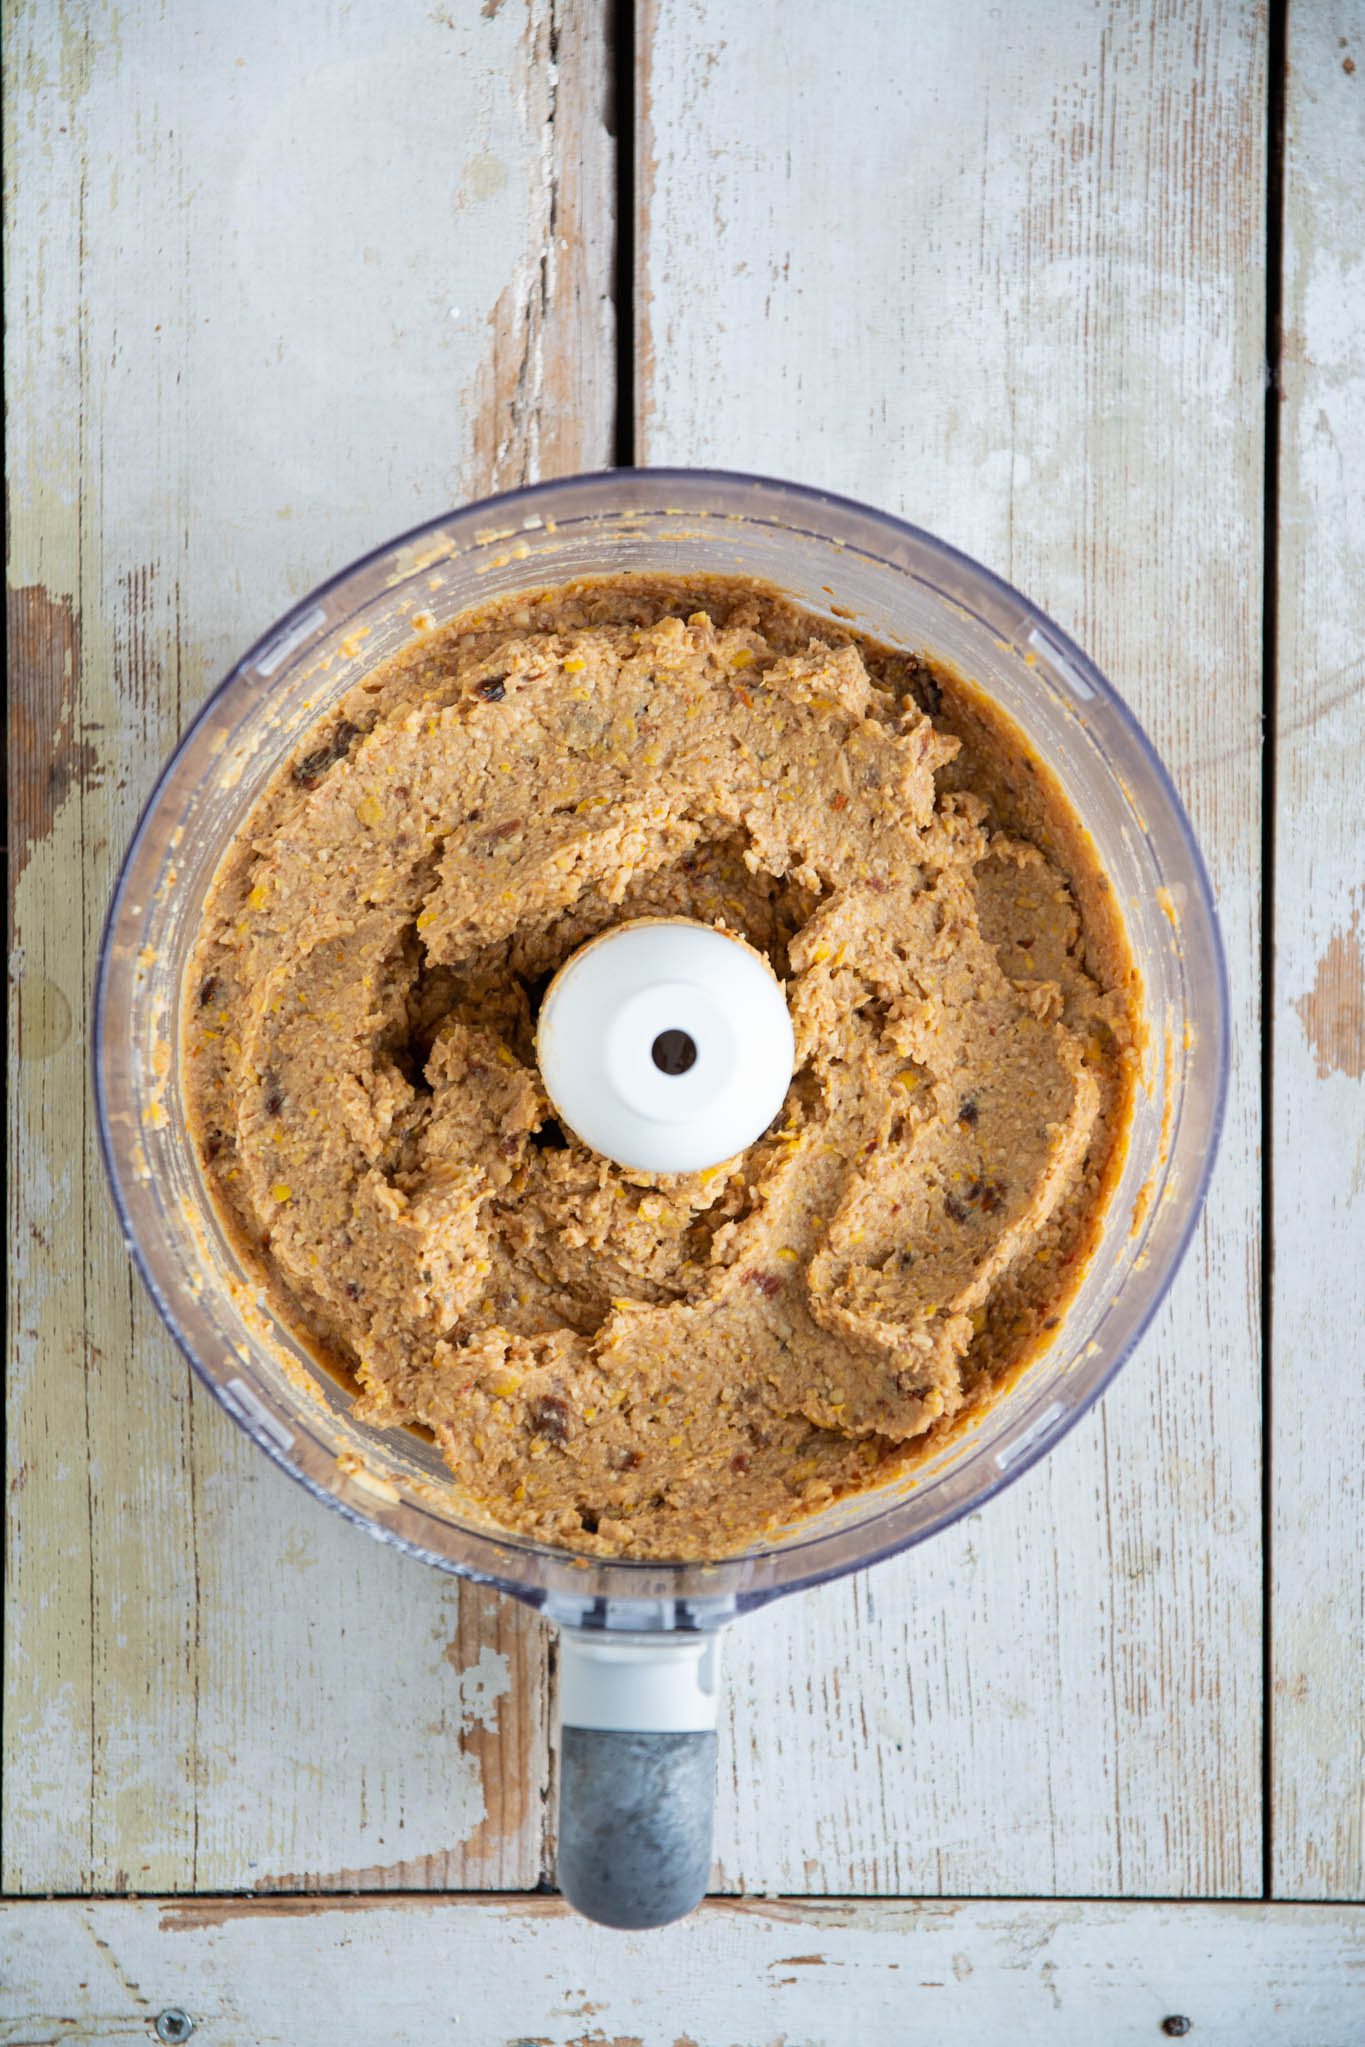 Learn how to make a delicious and easy soybean hummus recipe without tahini. Enjoy the sweetness from corn as well as the divine flavours of sun-dried tomatoes and dried basil. You’ll need 9 ingredients and a food processor to make this creamy homemade hummus. 